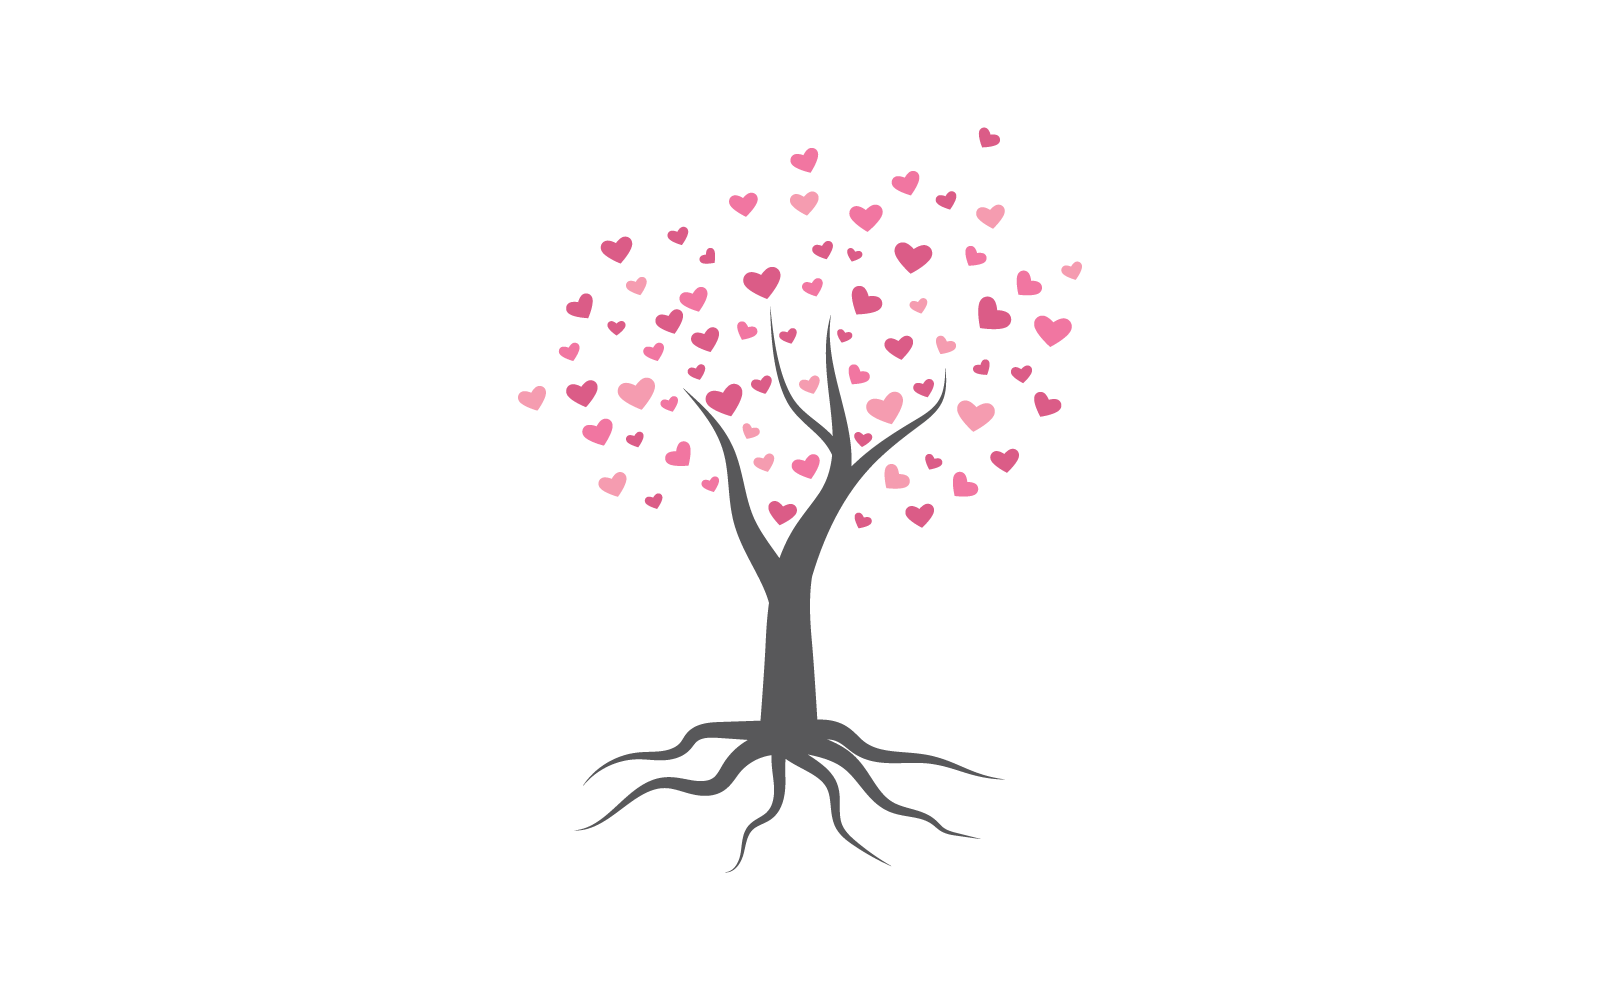 Love Tree With Heart Leaves Vector Illustration Design Logo Template